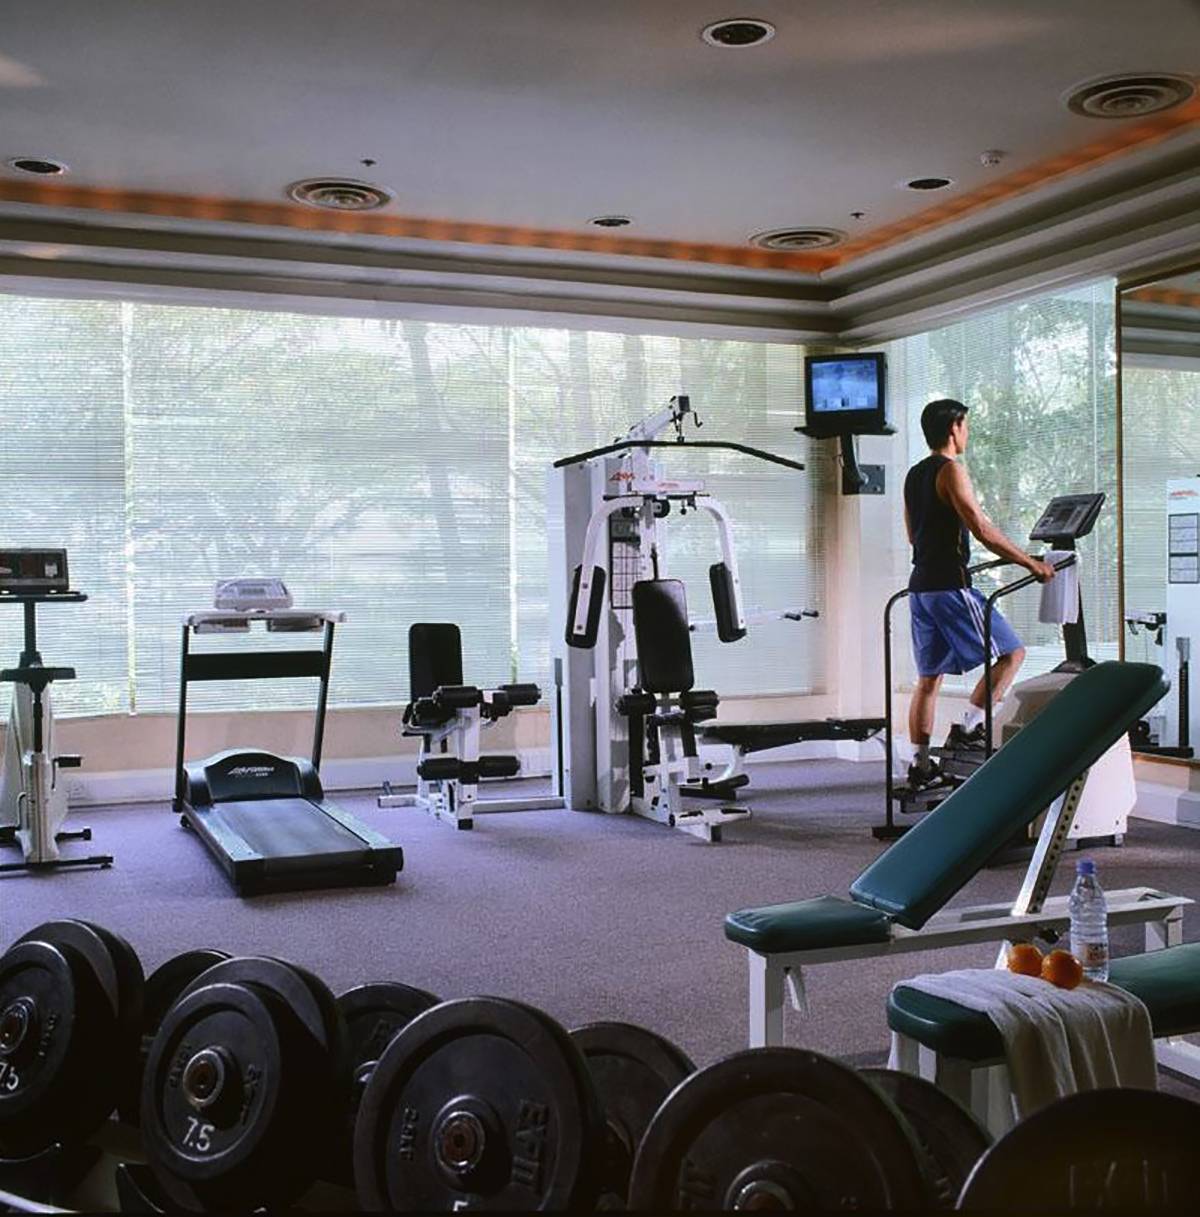 Gym - A well-equipped health and fitness club.